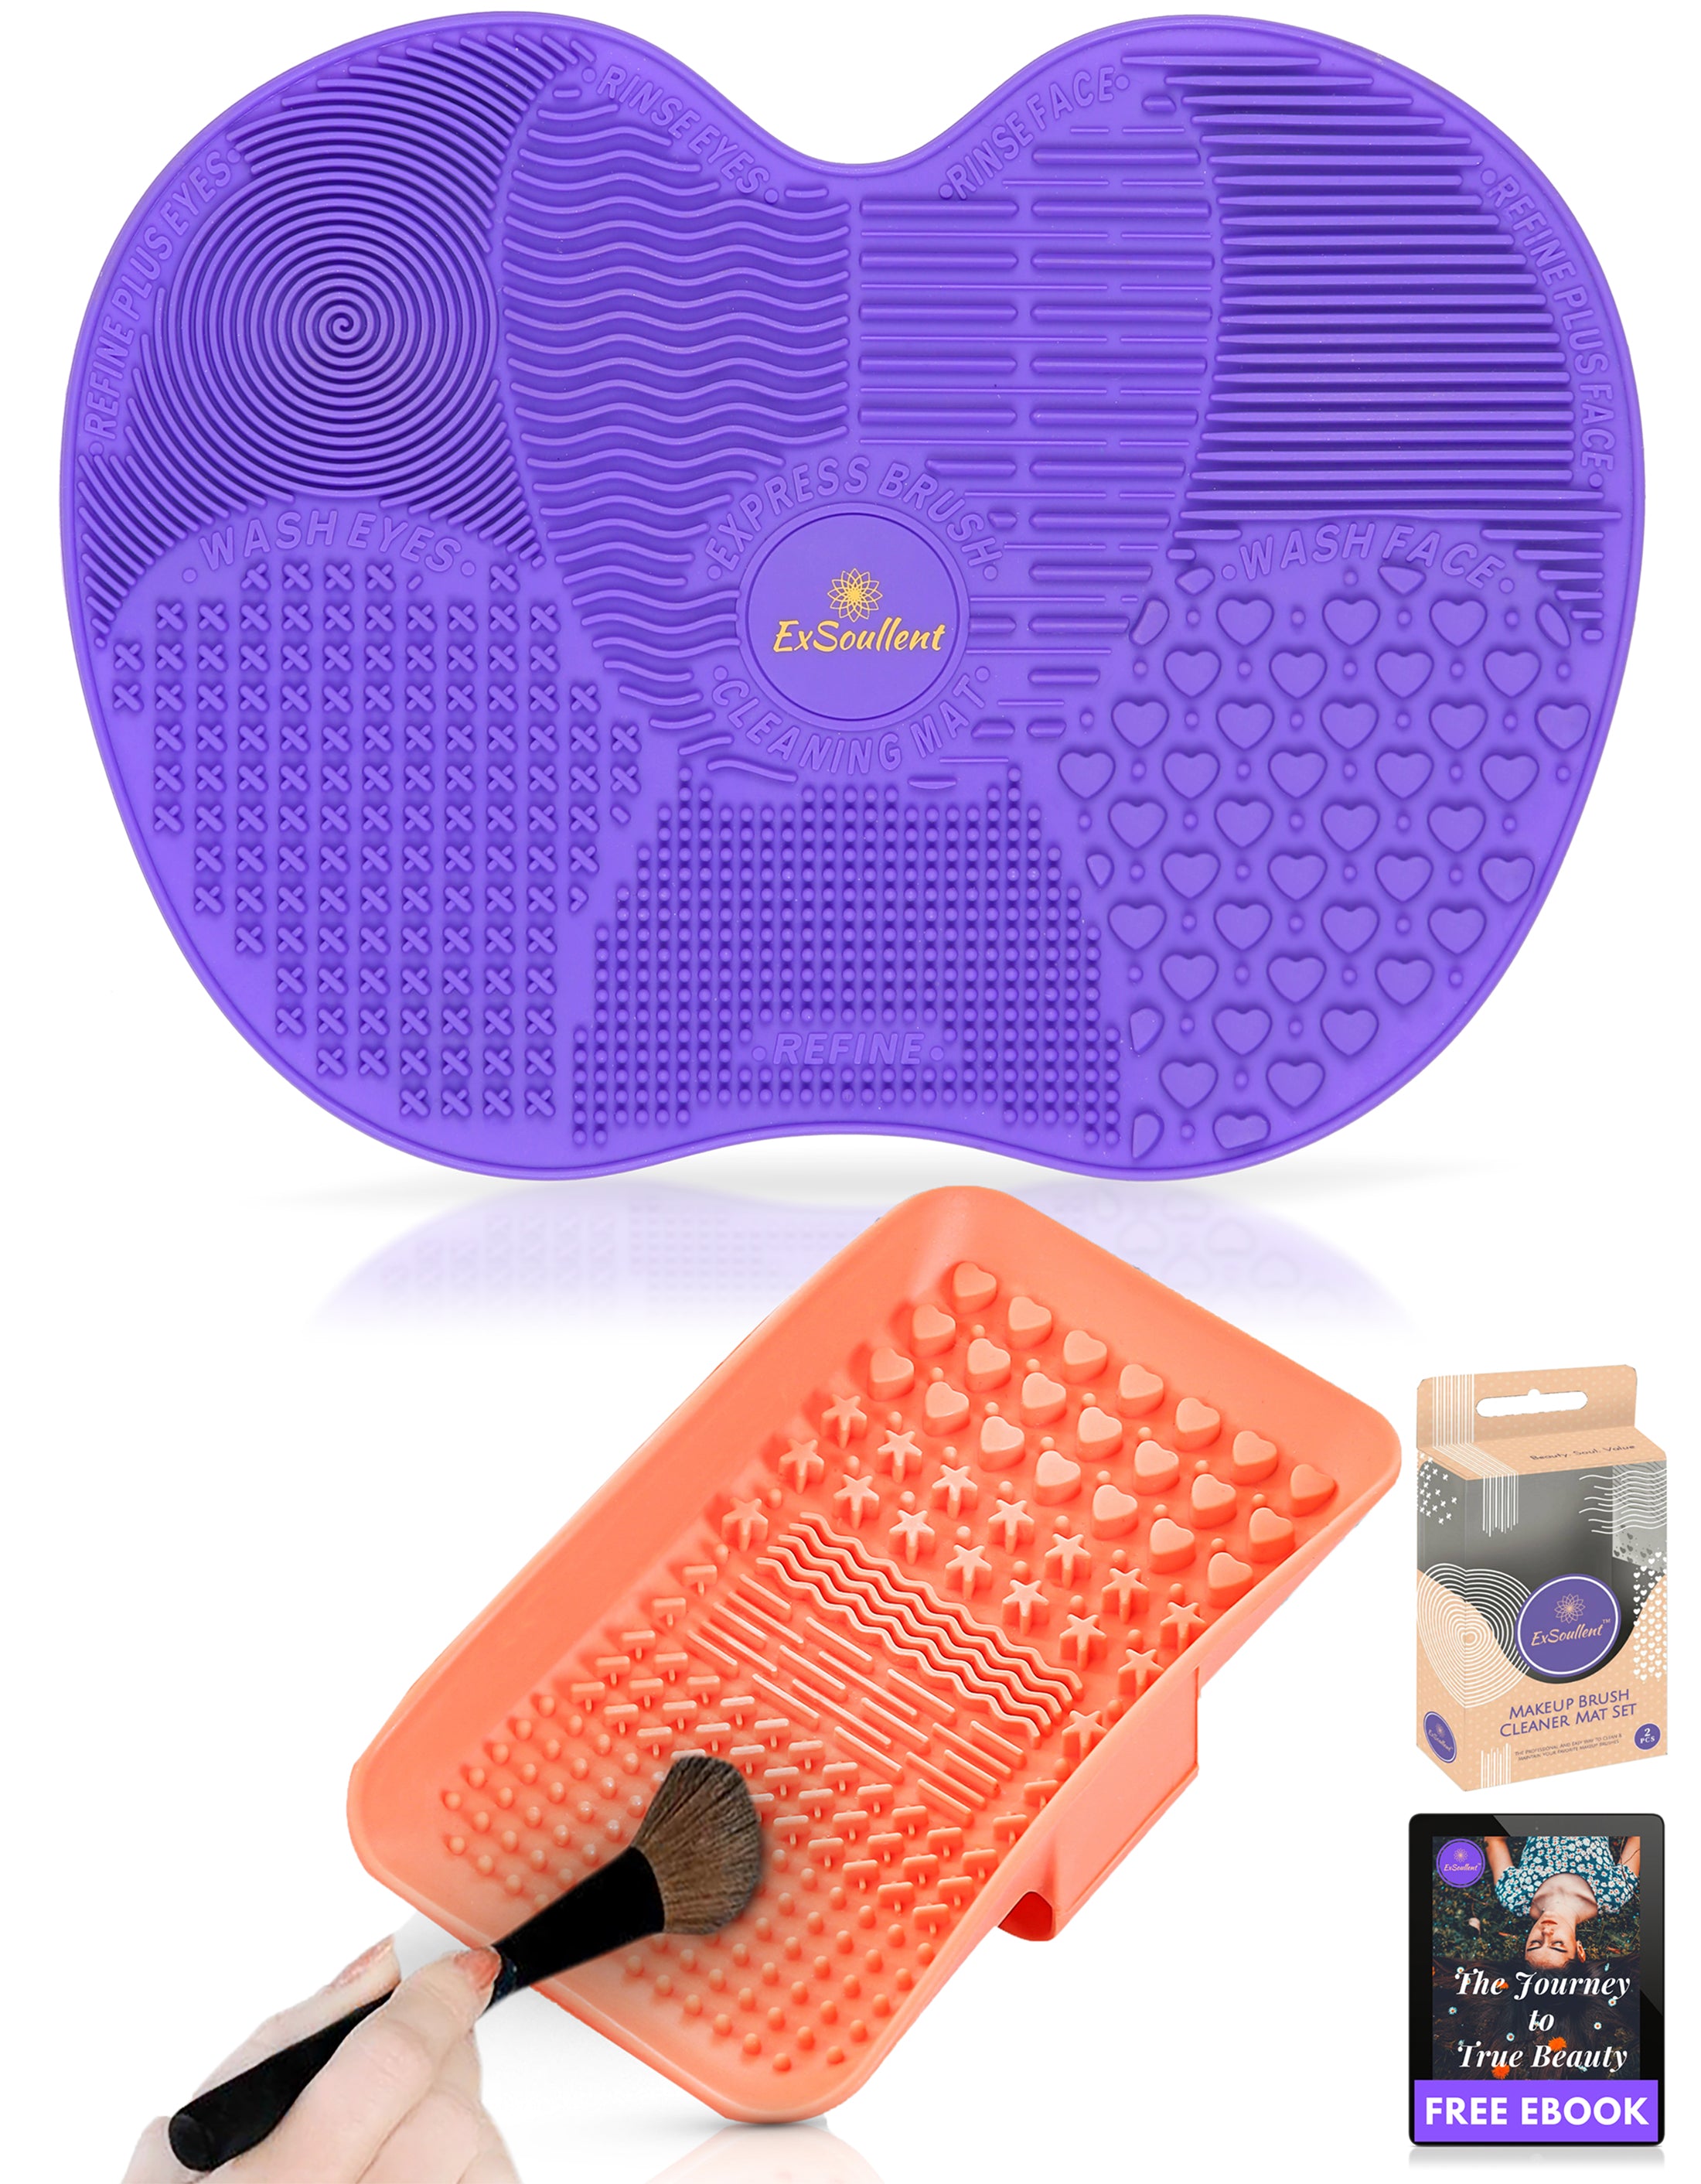 Skpblutn Kitchen Product Silicon Makeup Mat Makeup Cleaner Pad Cosmetic Mat  Portable Washing Tool Cleaning Brush Purple